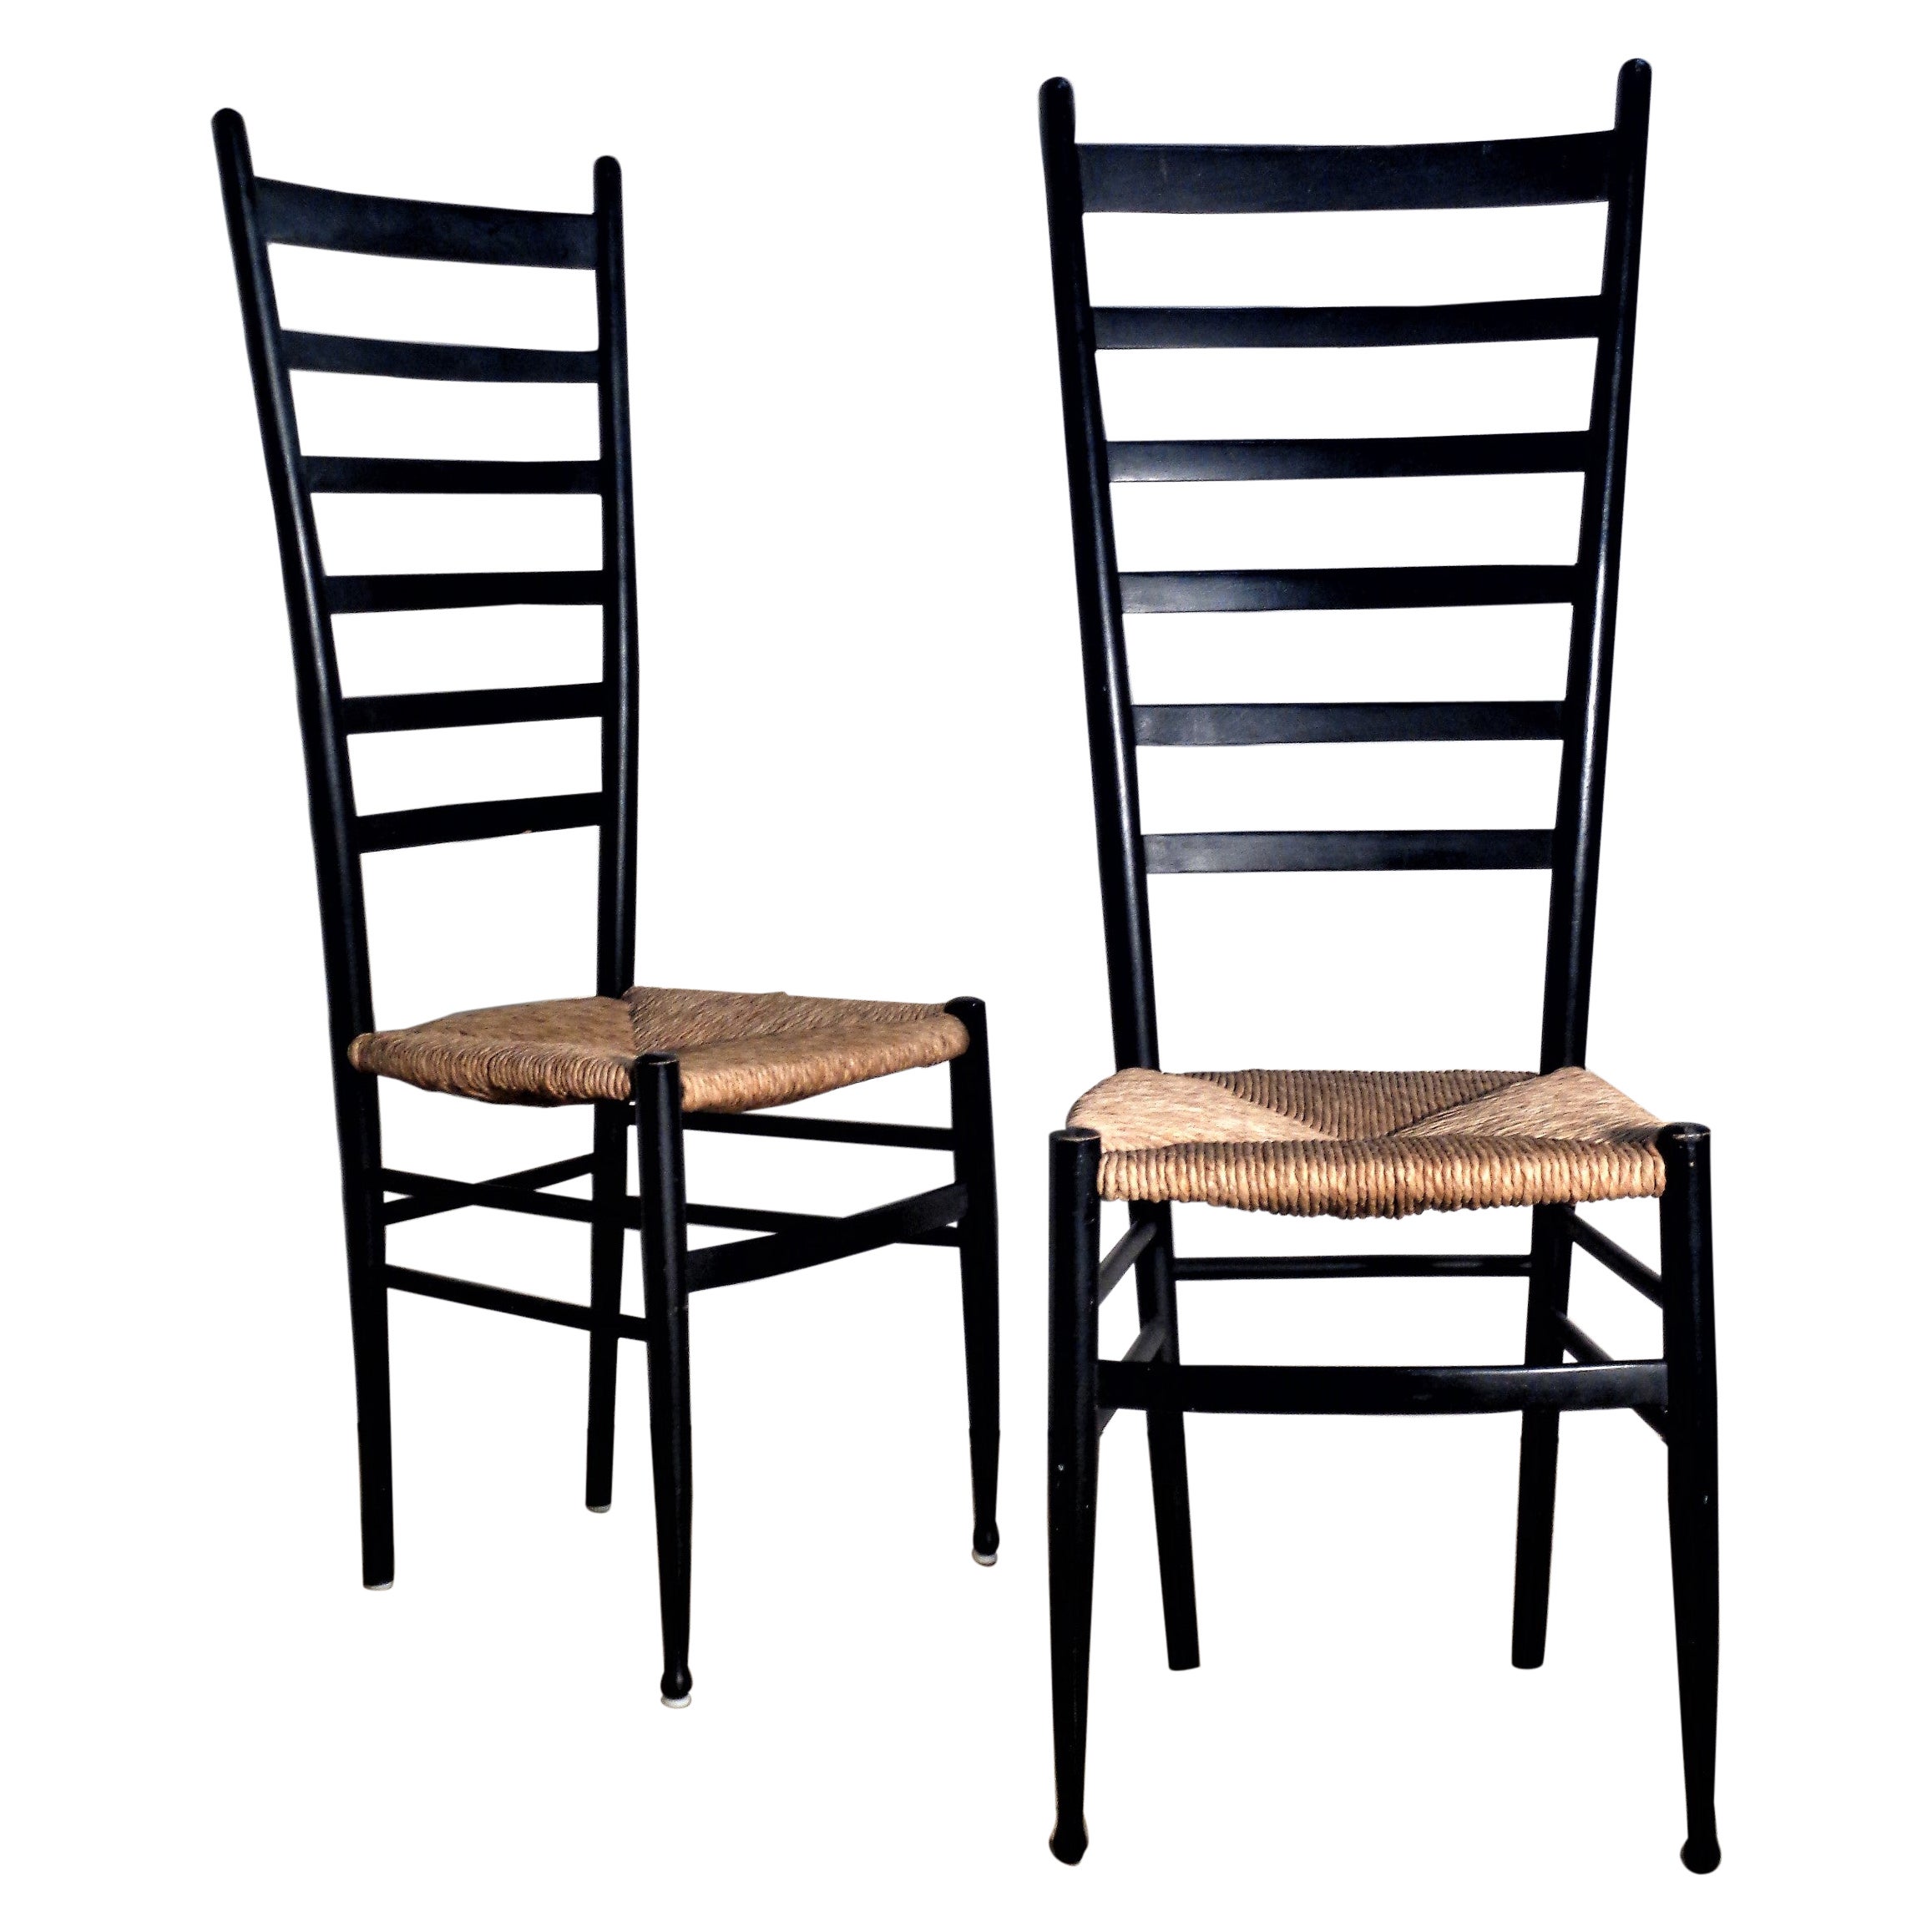  Tall Ebonized Ladder Back Chairs Style of Gio Ponti, Made in Italy 1960's